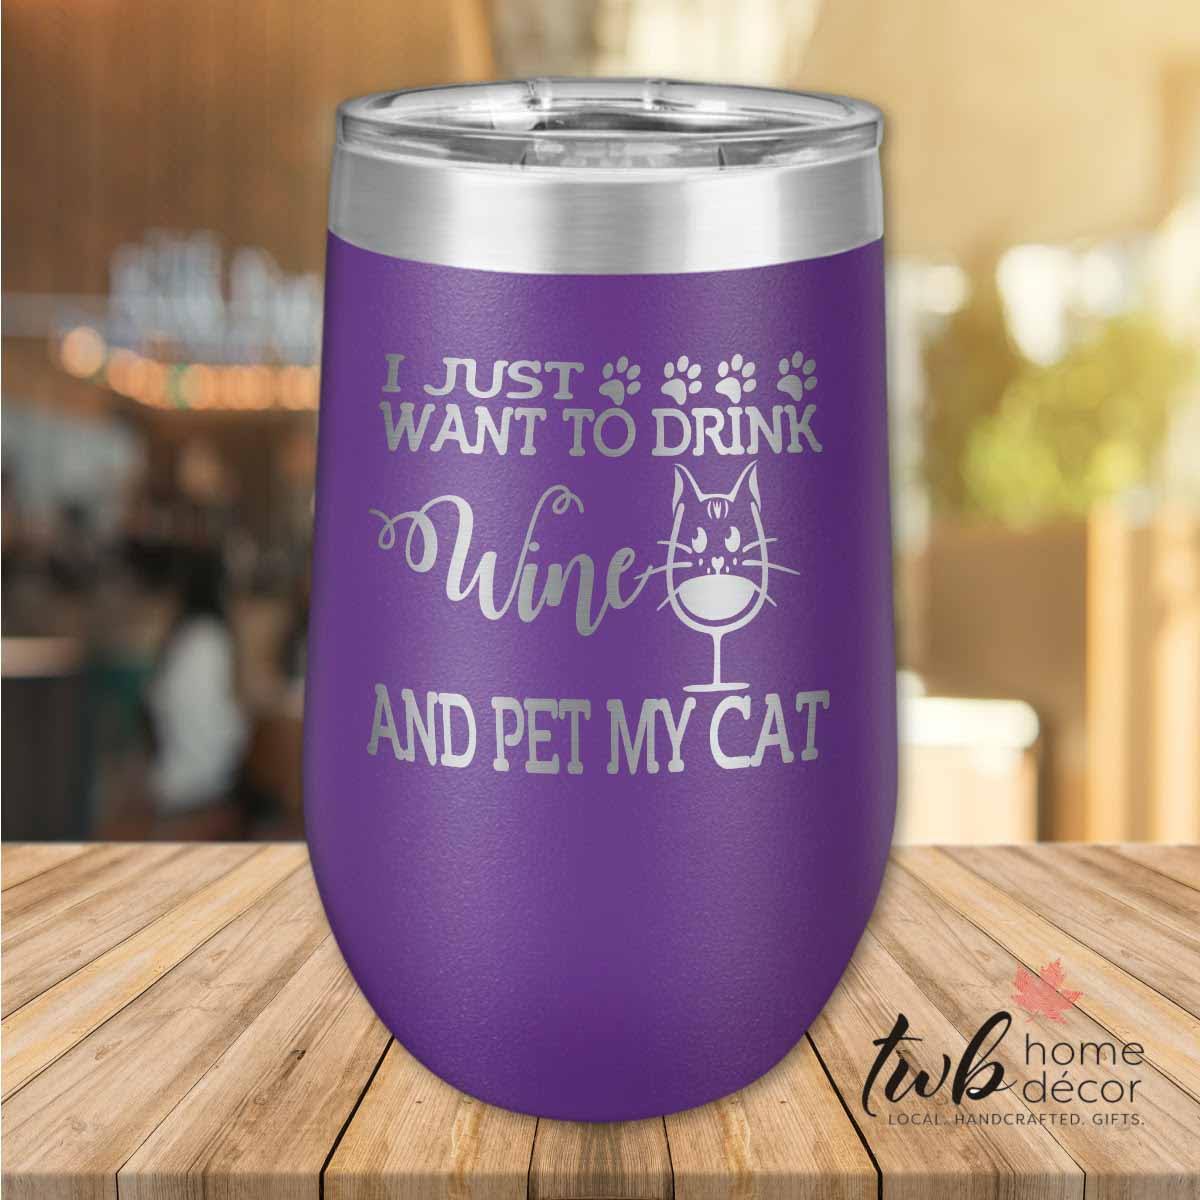 Pet the Cat Thermal - TWB Home Decor